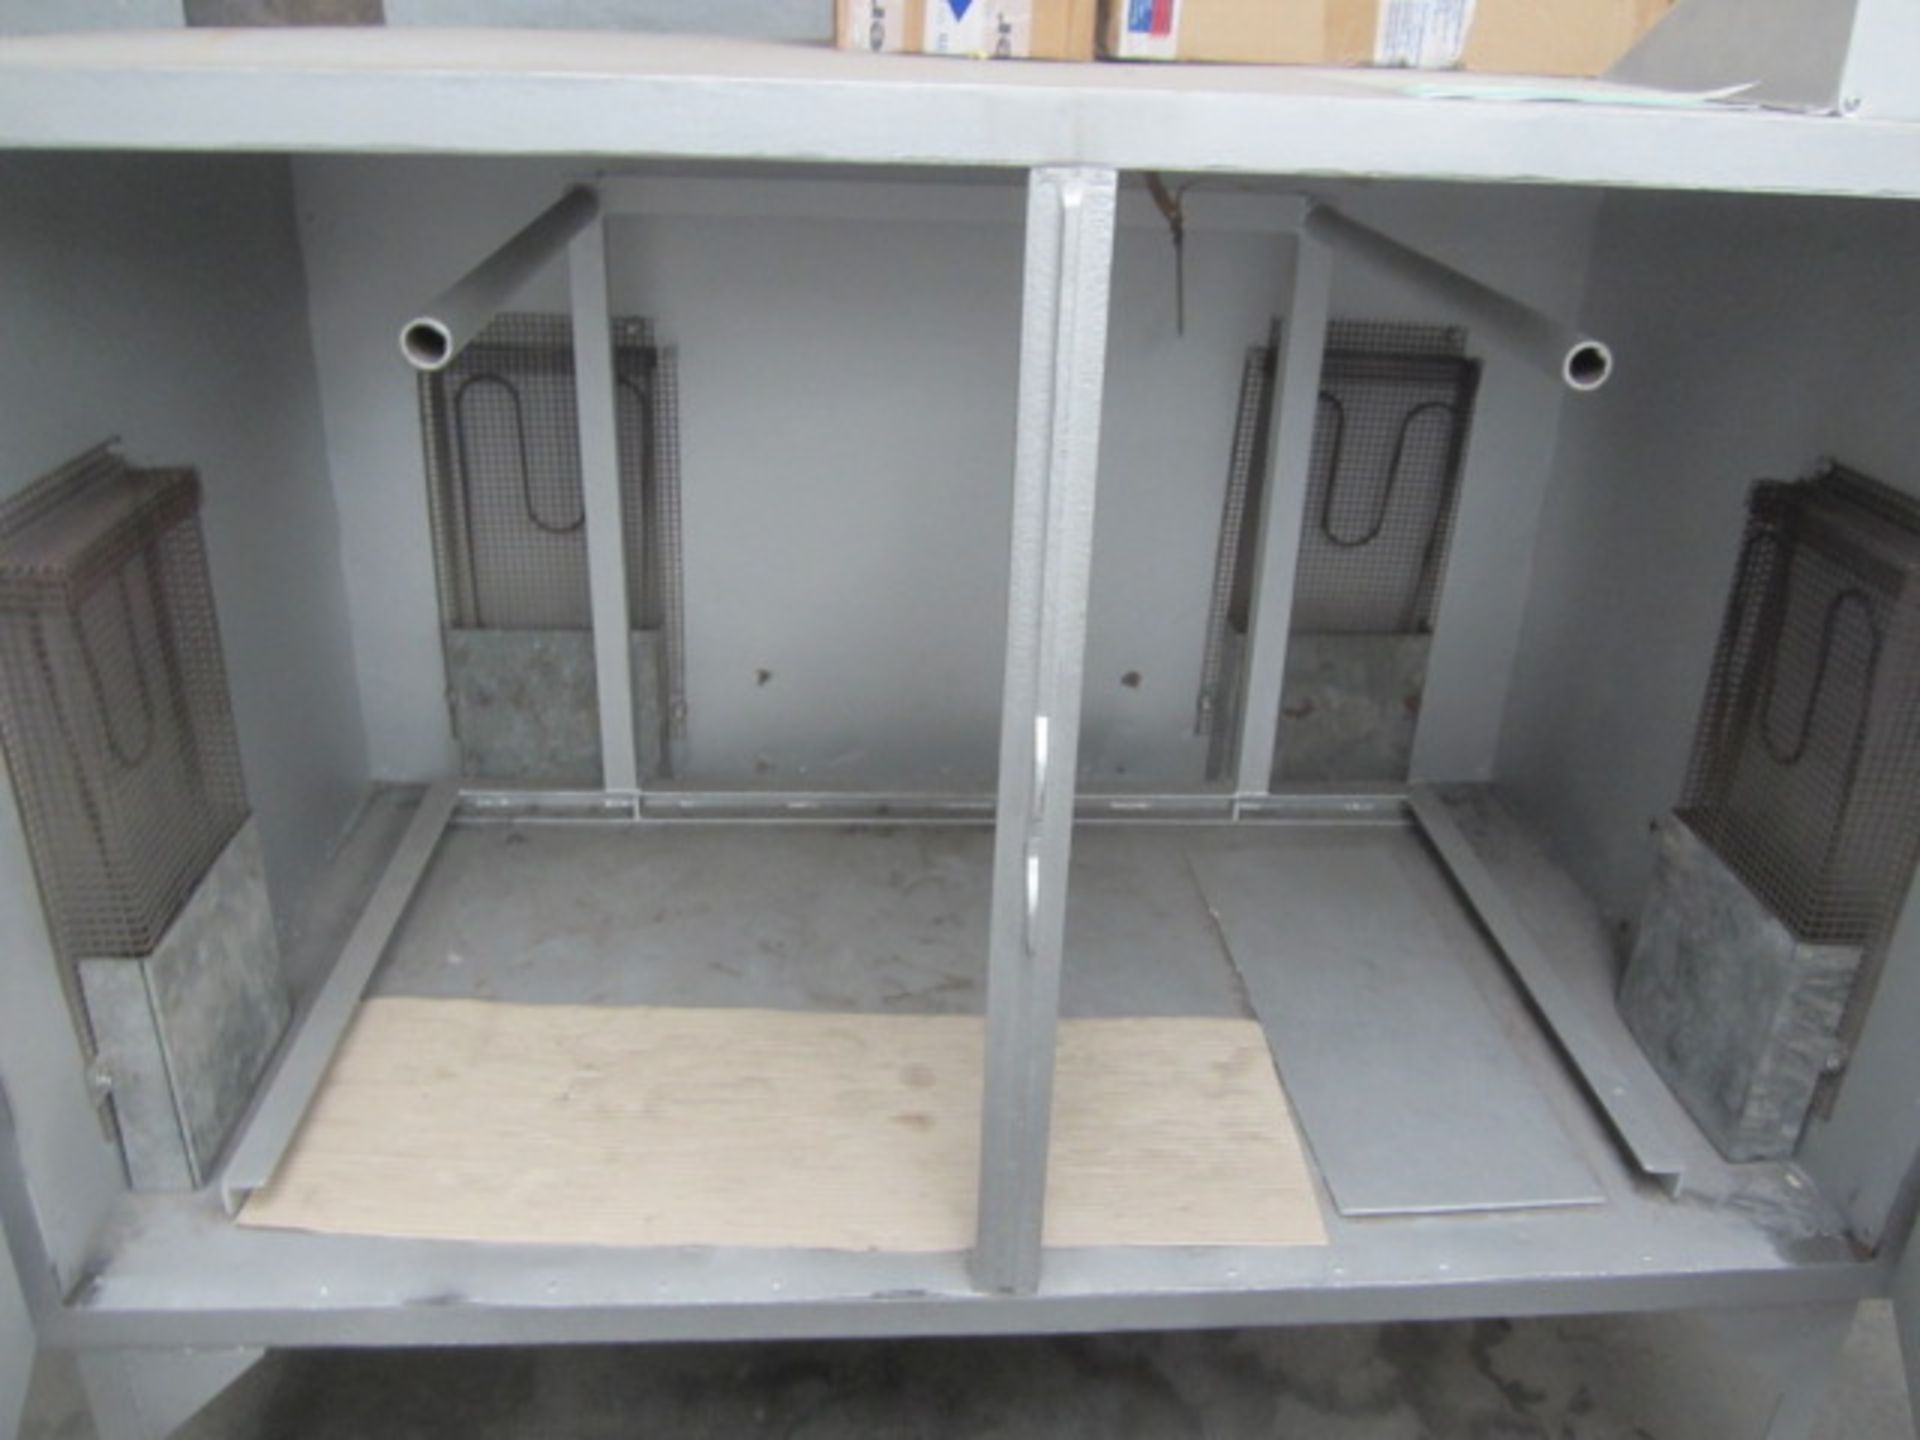 Steel framed twin door heated cabinet, 1550 x 900 x 1350mm, 3 phase - Image 2 of 3